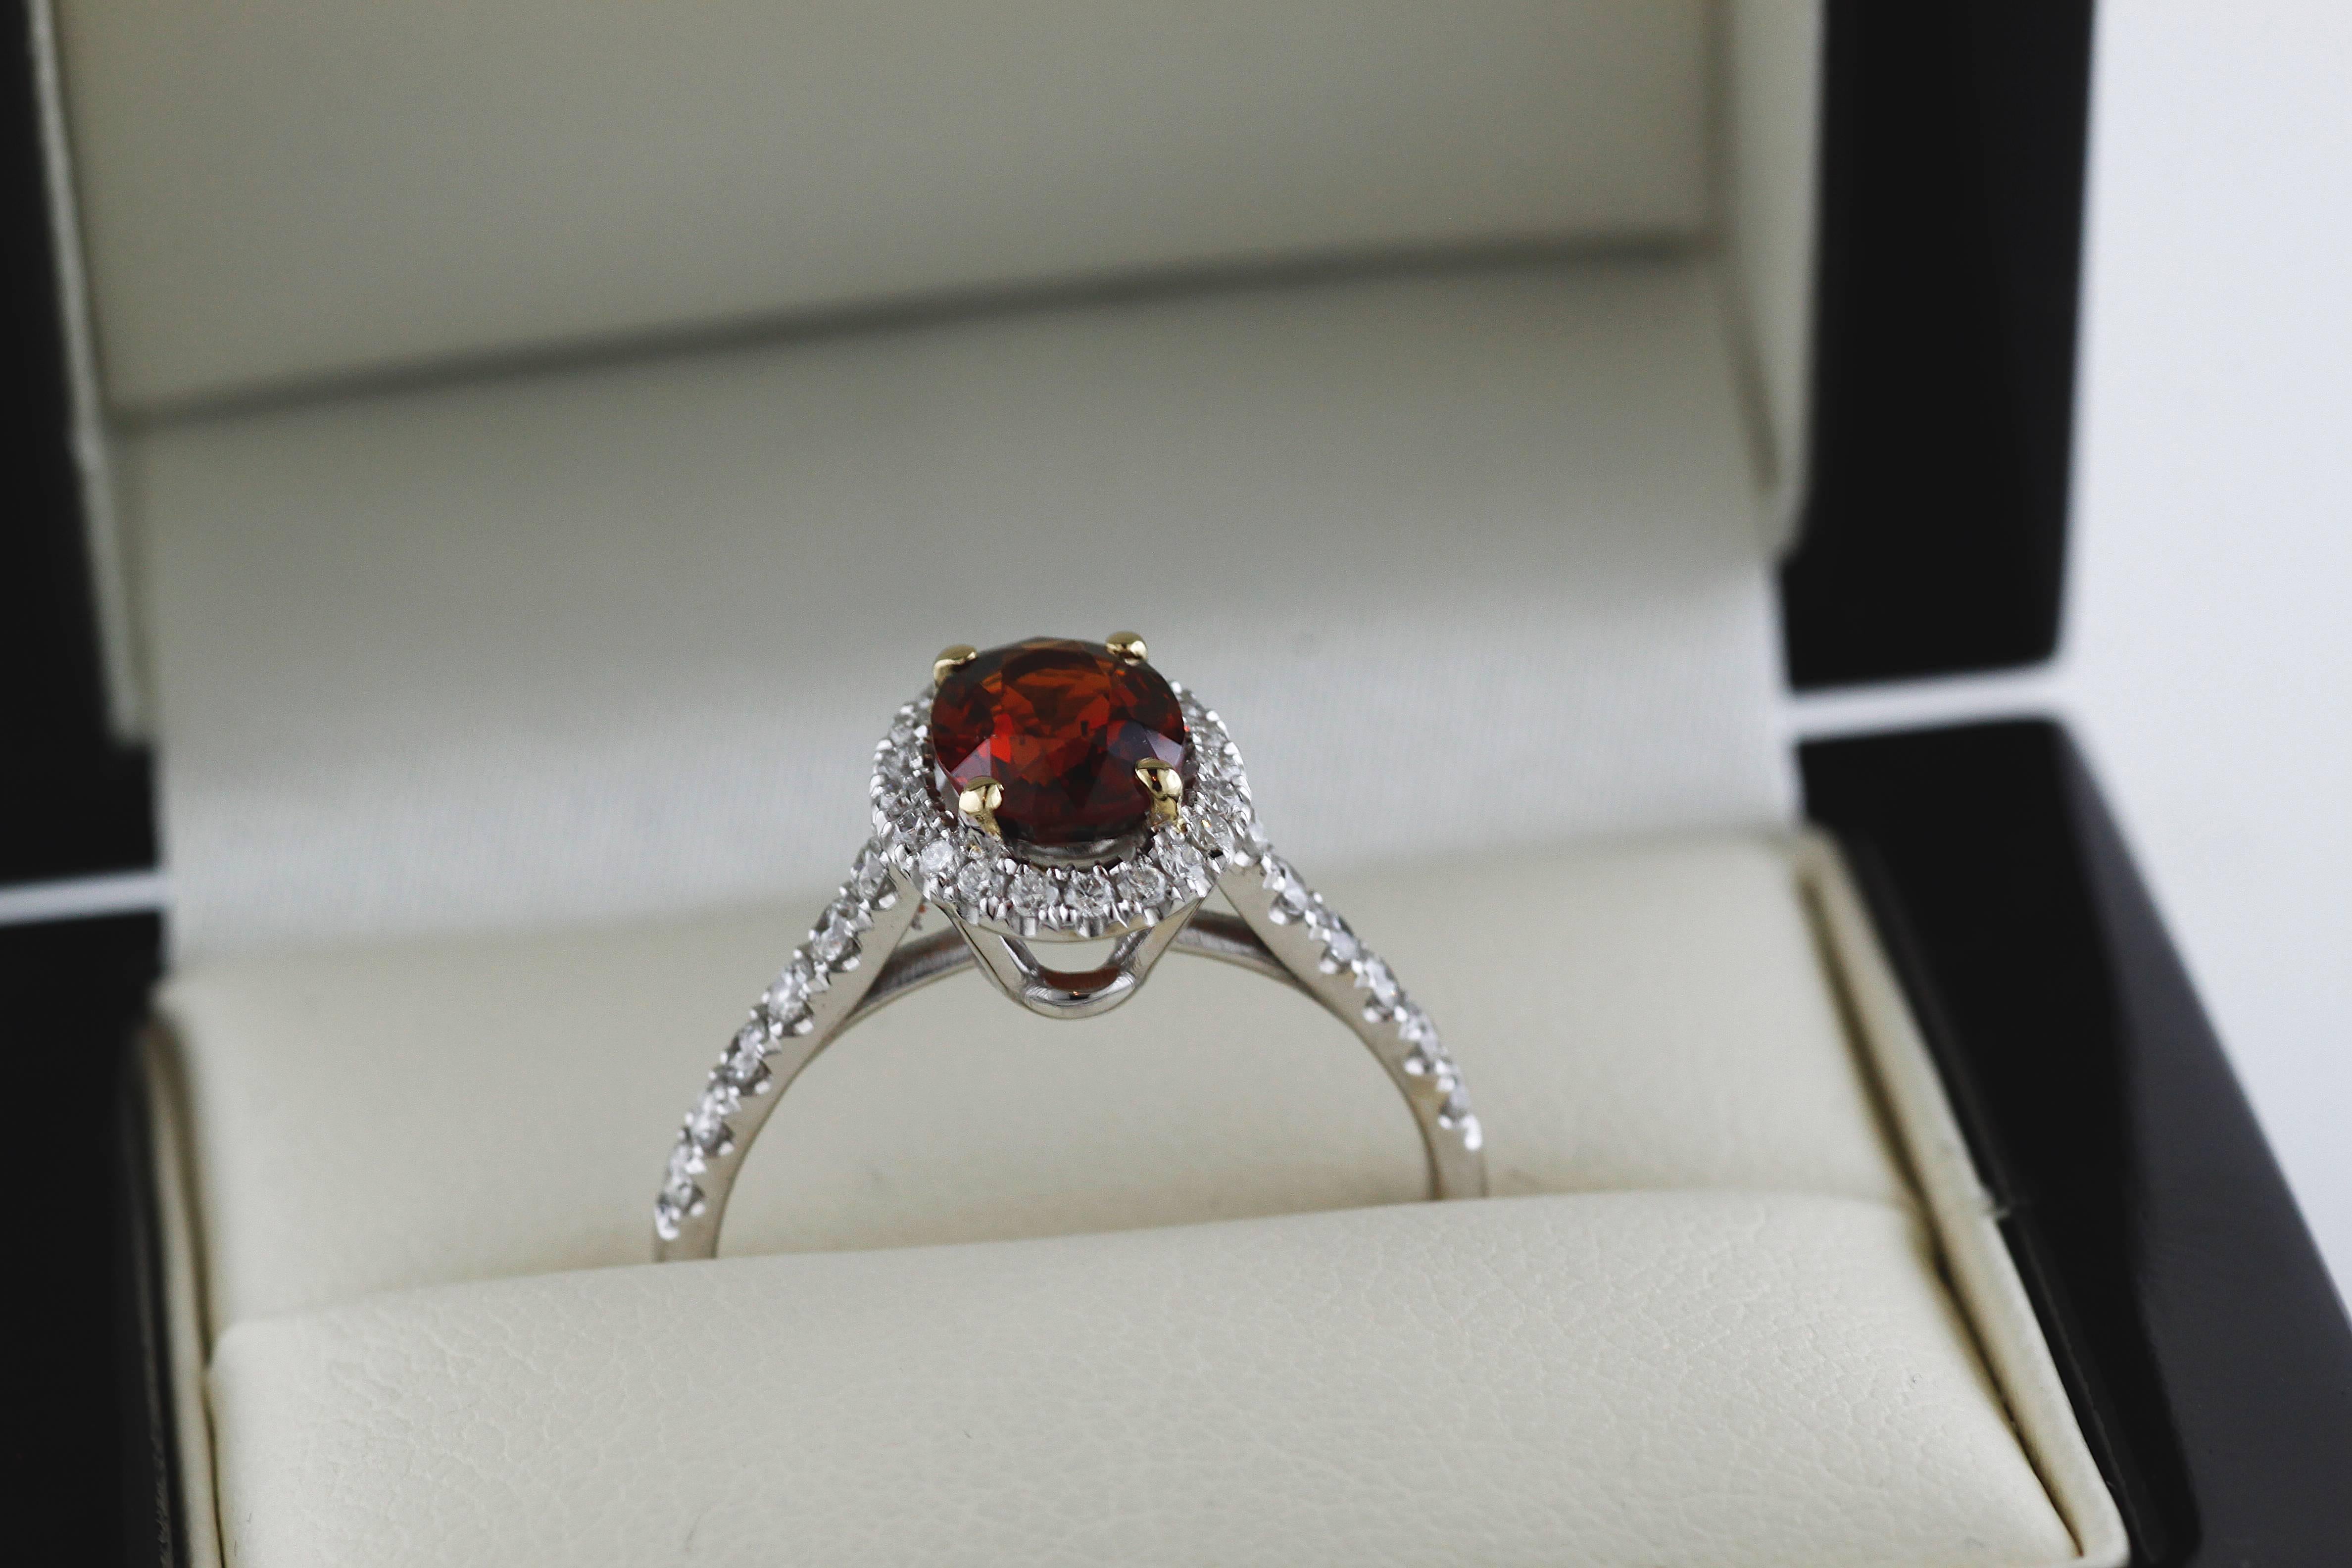 A beautiful hand-made new jewelry piece set in 18 karat white gold with an rare 1.30 carat orange transparent spessartite garnet center stone set in 18 karat yellow gold. The center stone is encircled by a row of prong-set natural diamonds with a